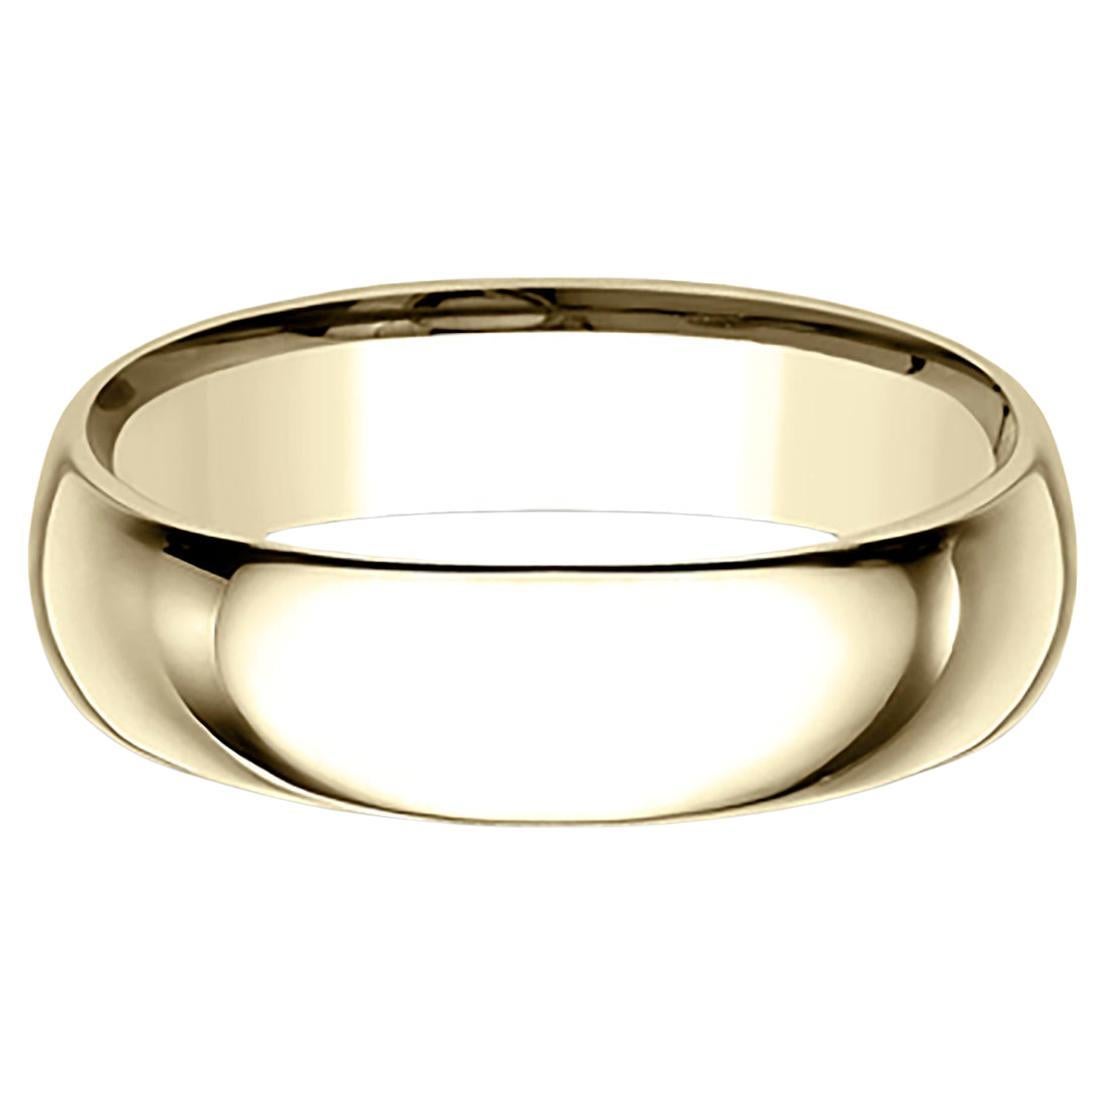 Benchmark Classic Comfort Fit Wedding Band in 14K Yellow Gold, Width 6mm